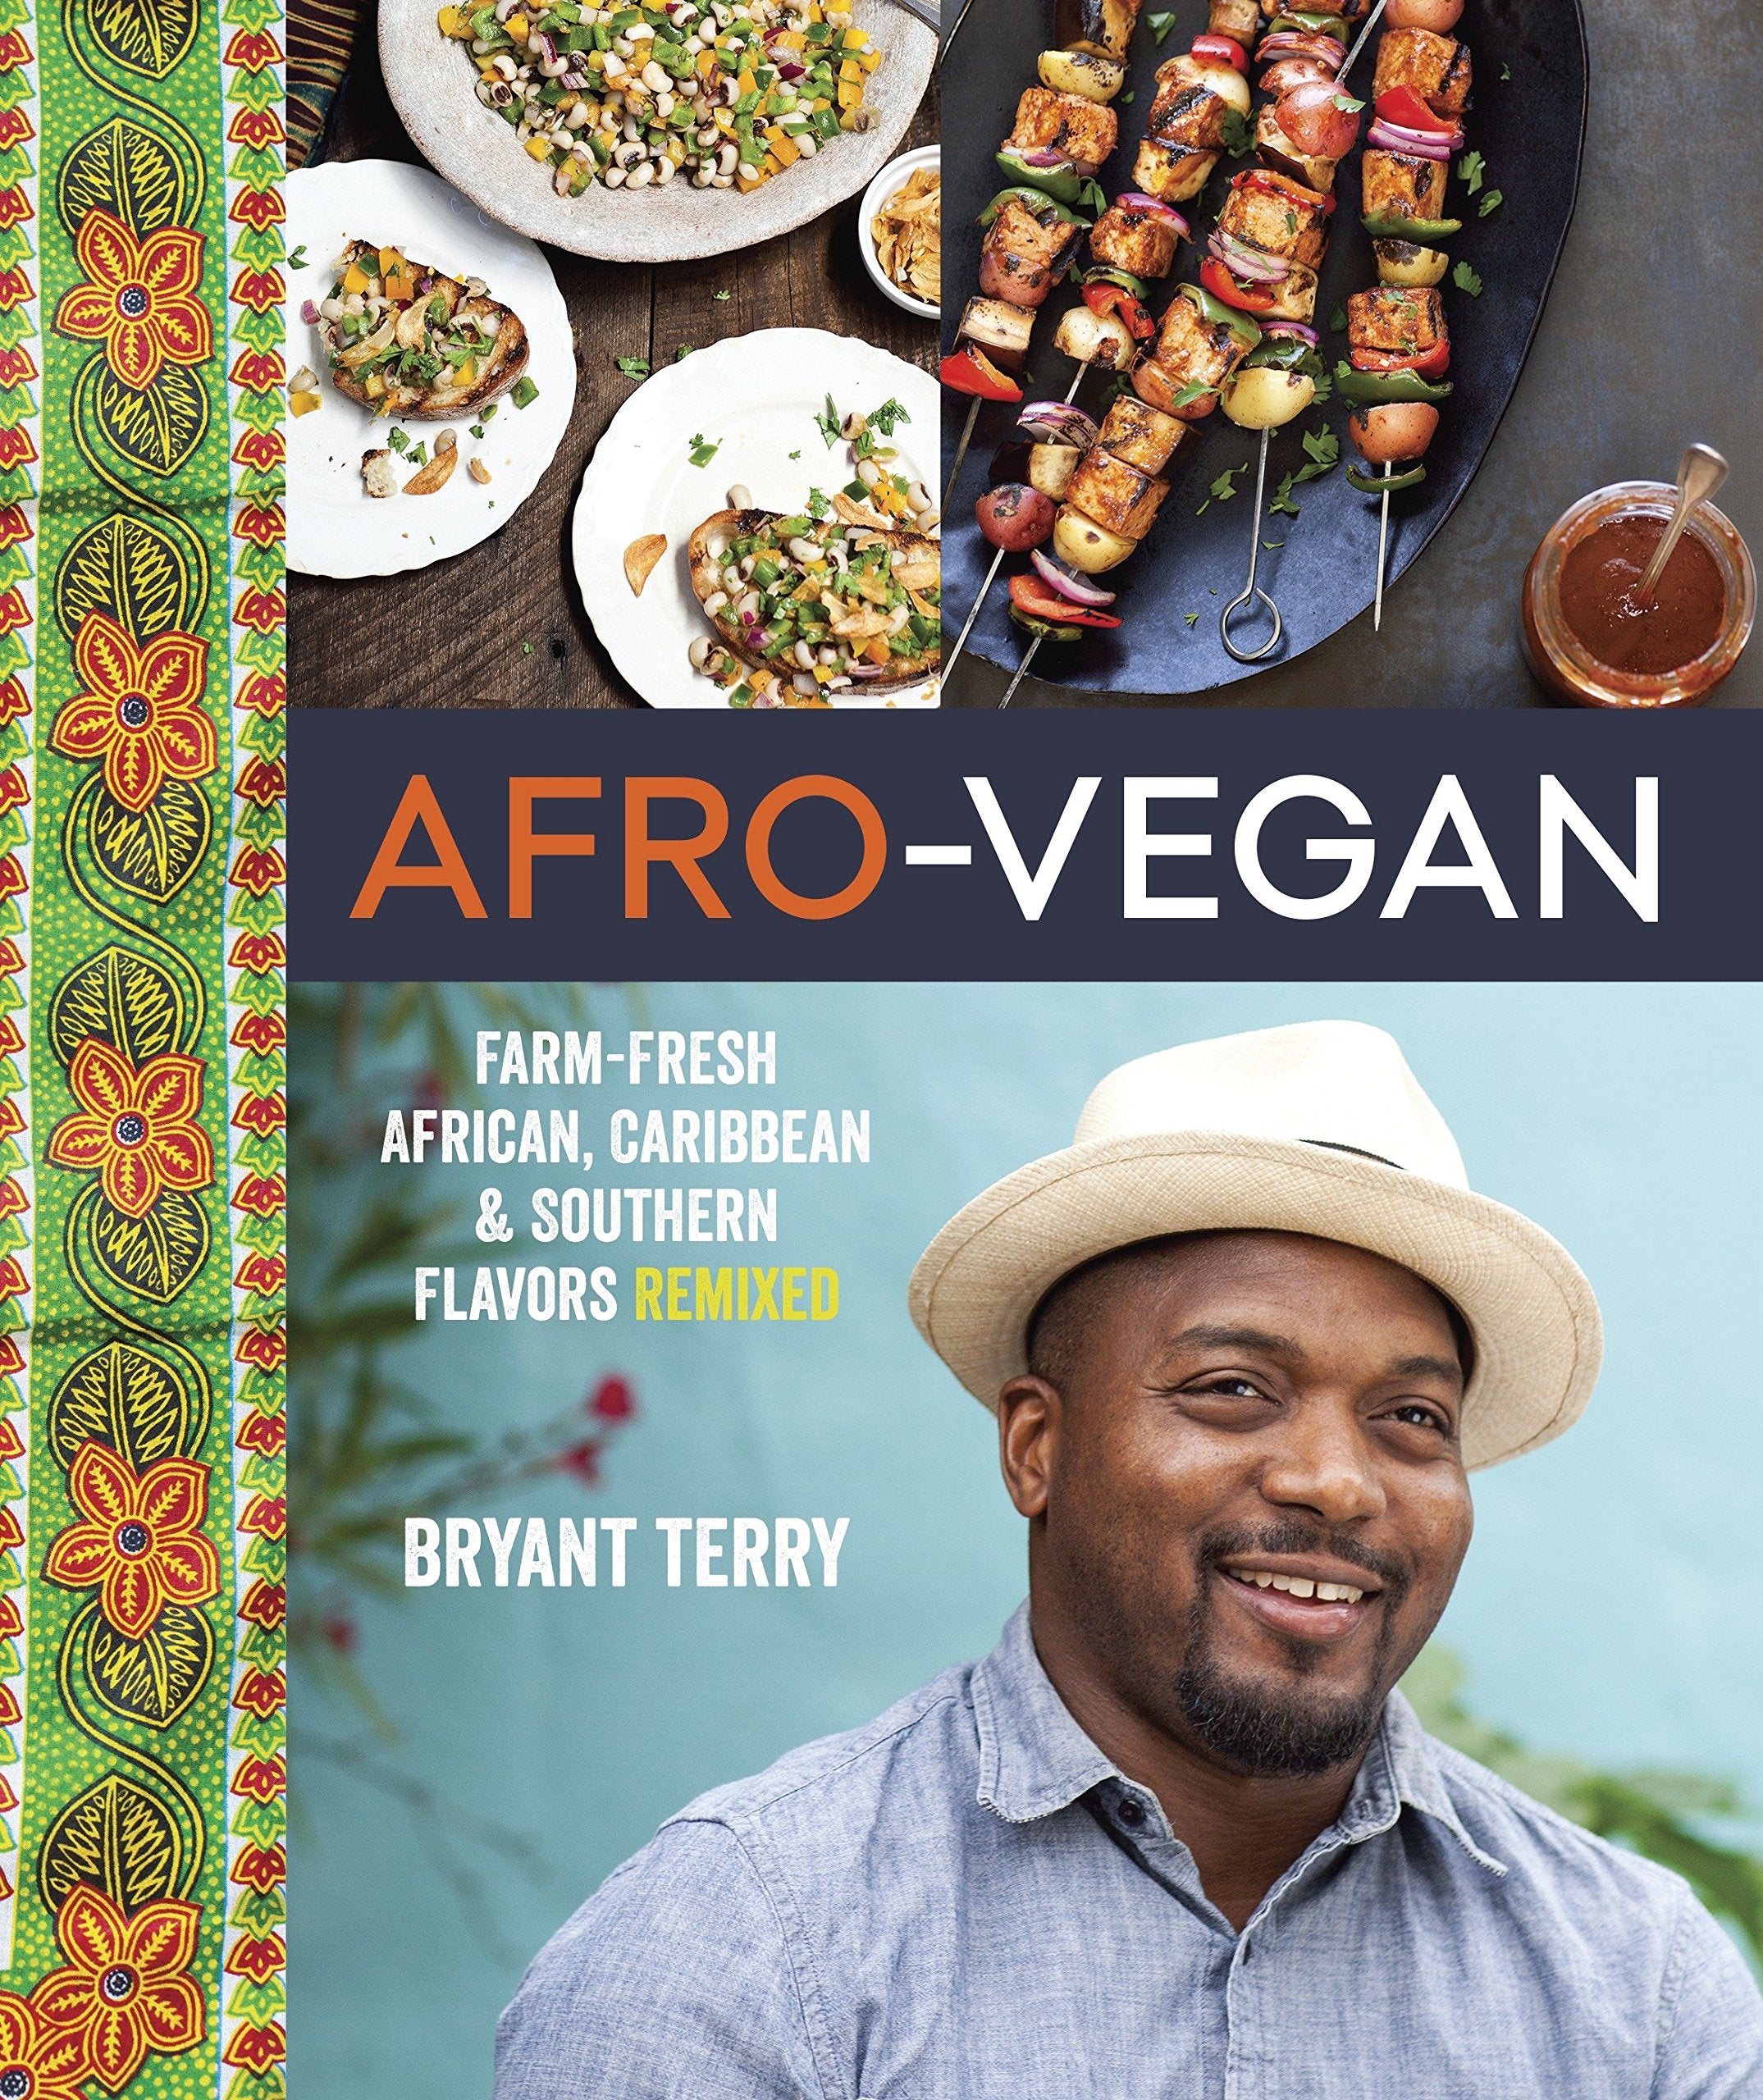 Afro-Vegan: Farm-Fresh African, Caribbean, and Southern Flavors Remixed (Bryant Terry)